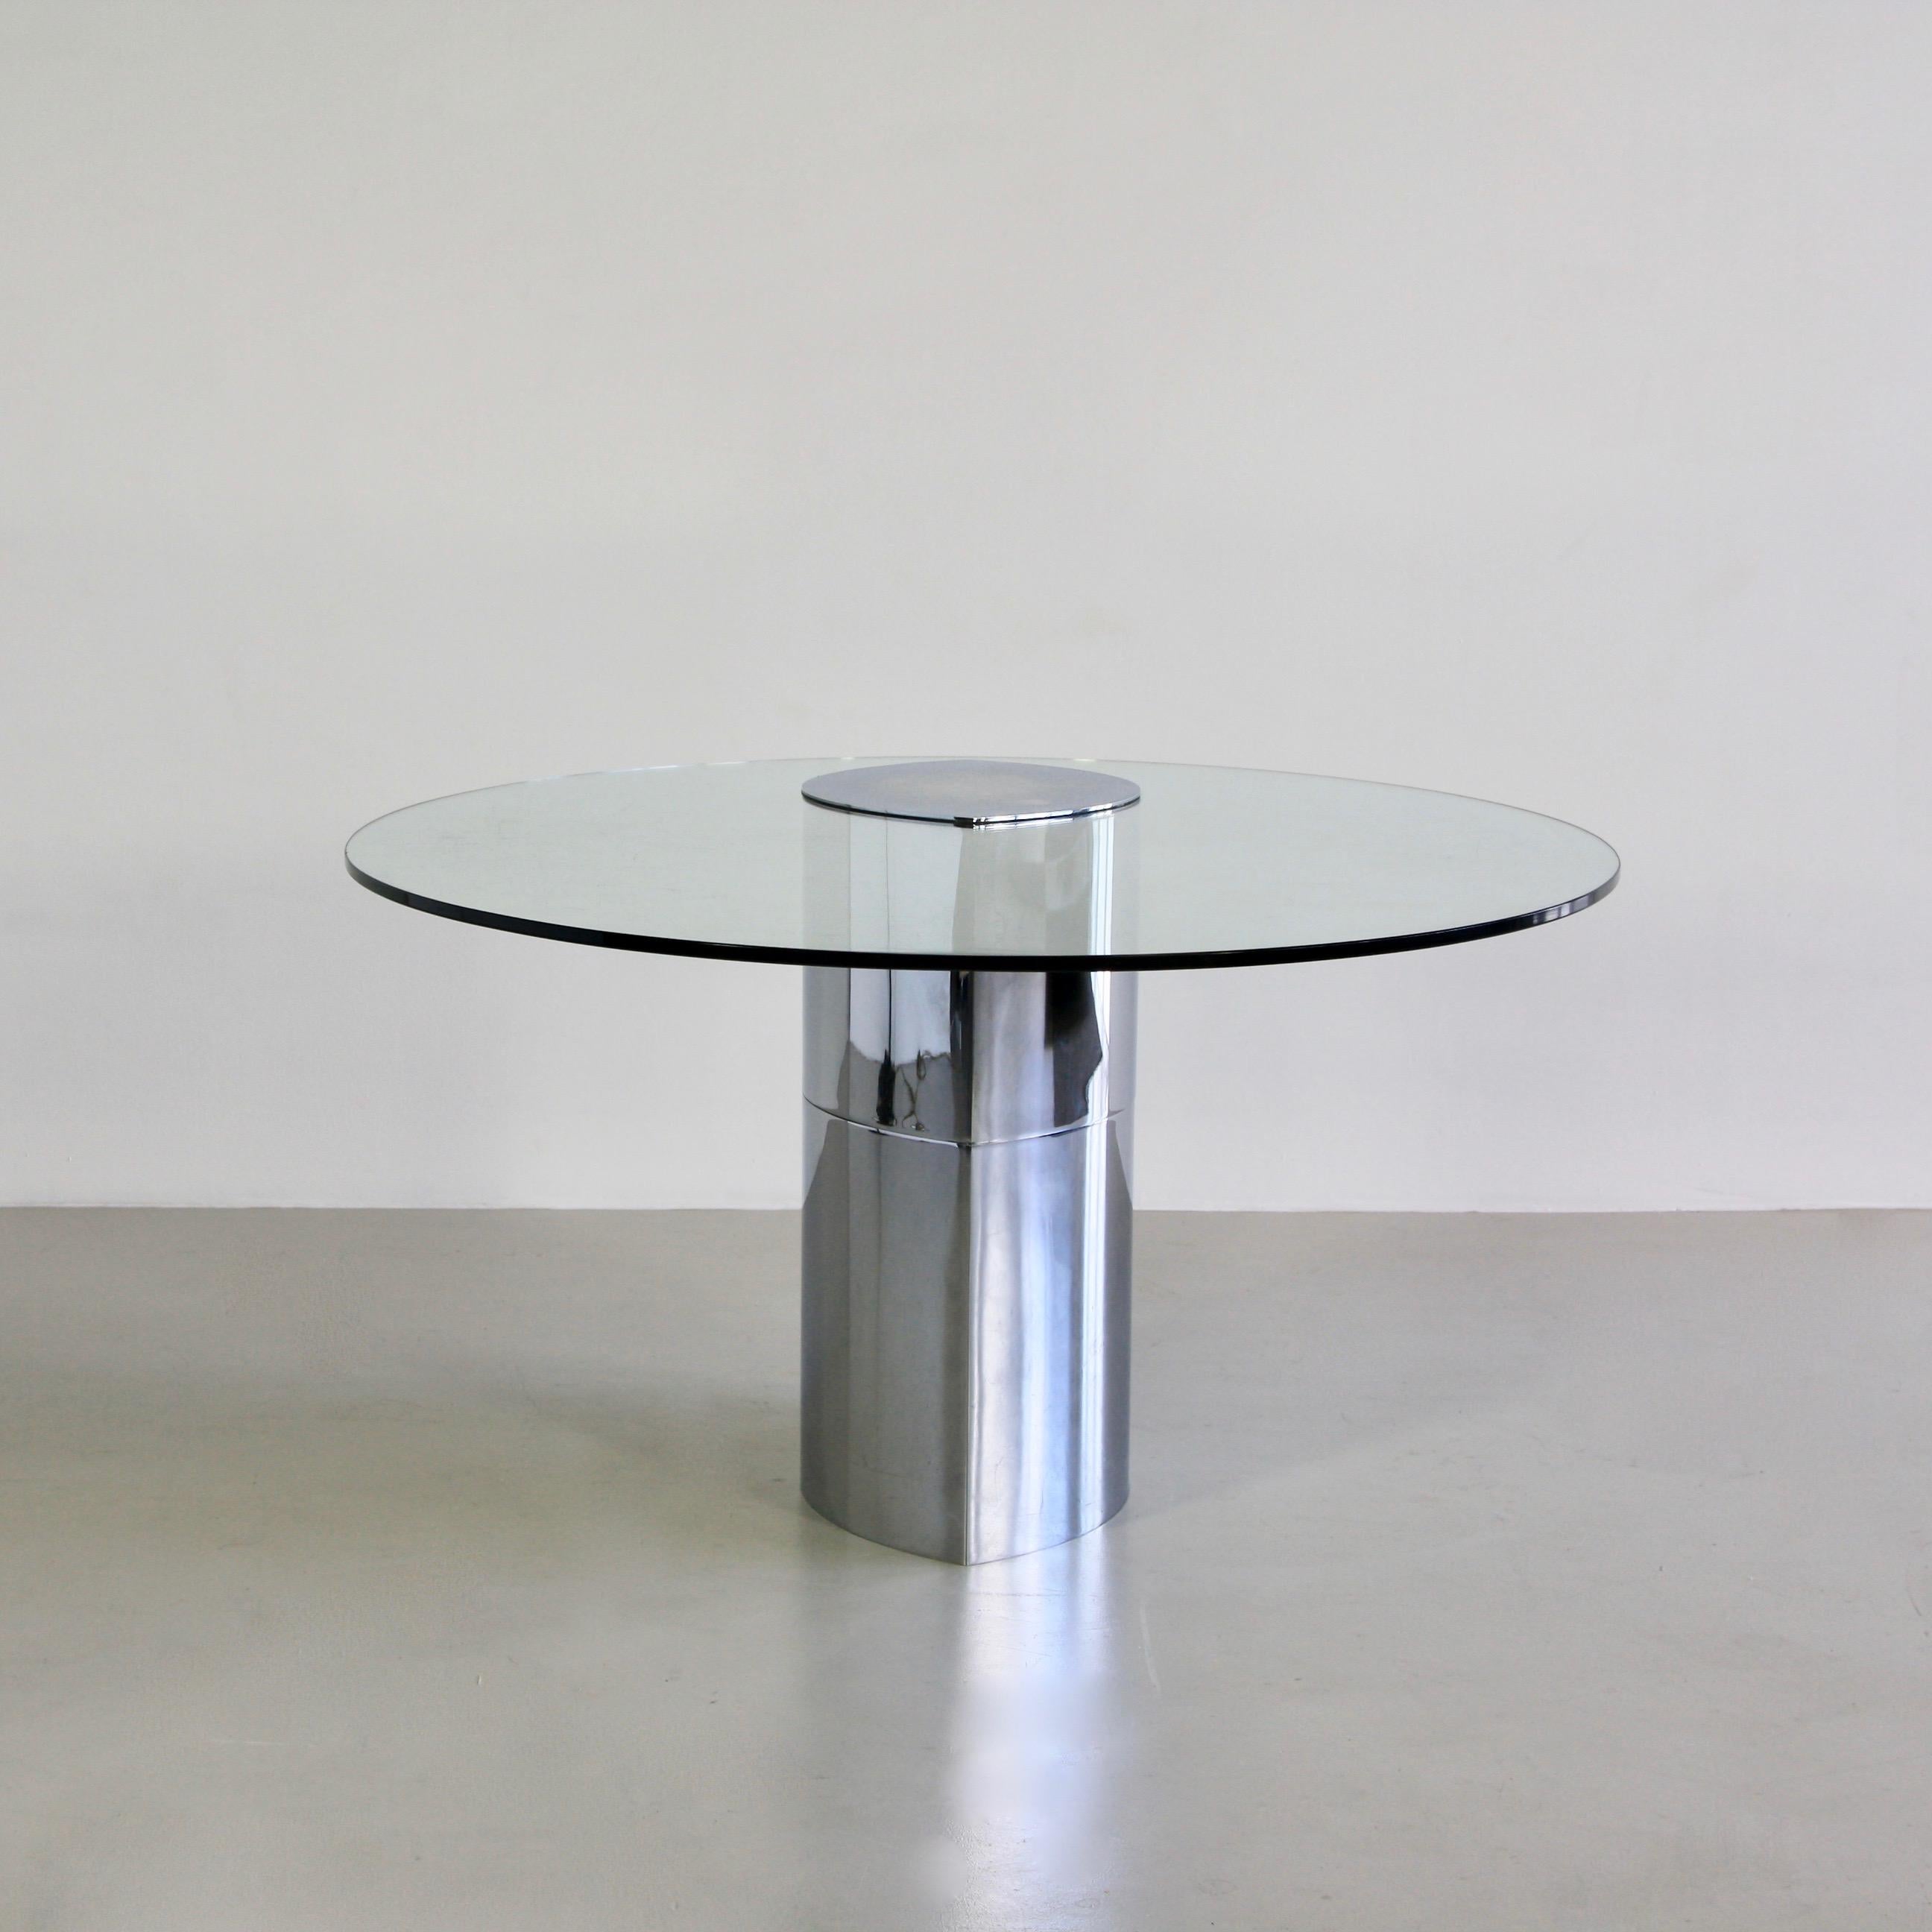 The Lunario table, consisting of a weighted chrome base with cantilevered glass top, both in matching elliptical shape. Superb minimalist design by Boeri. Gavina, the producing company of this table was taken over by Knoll International during